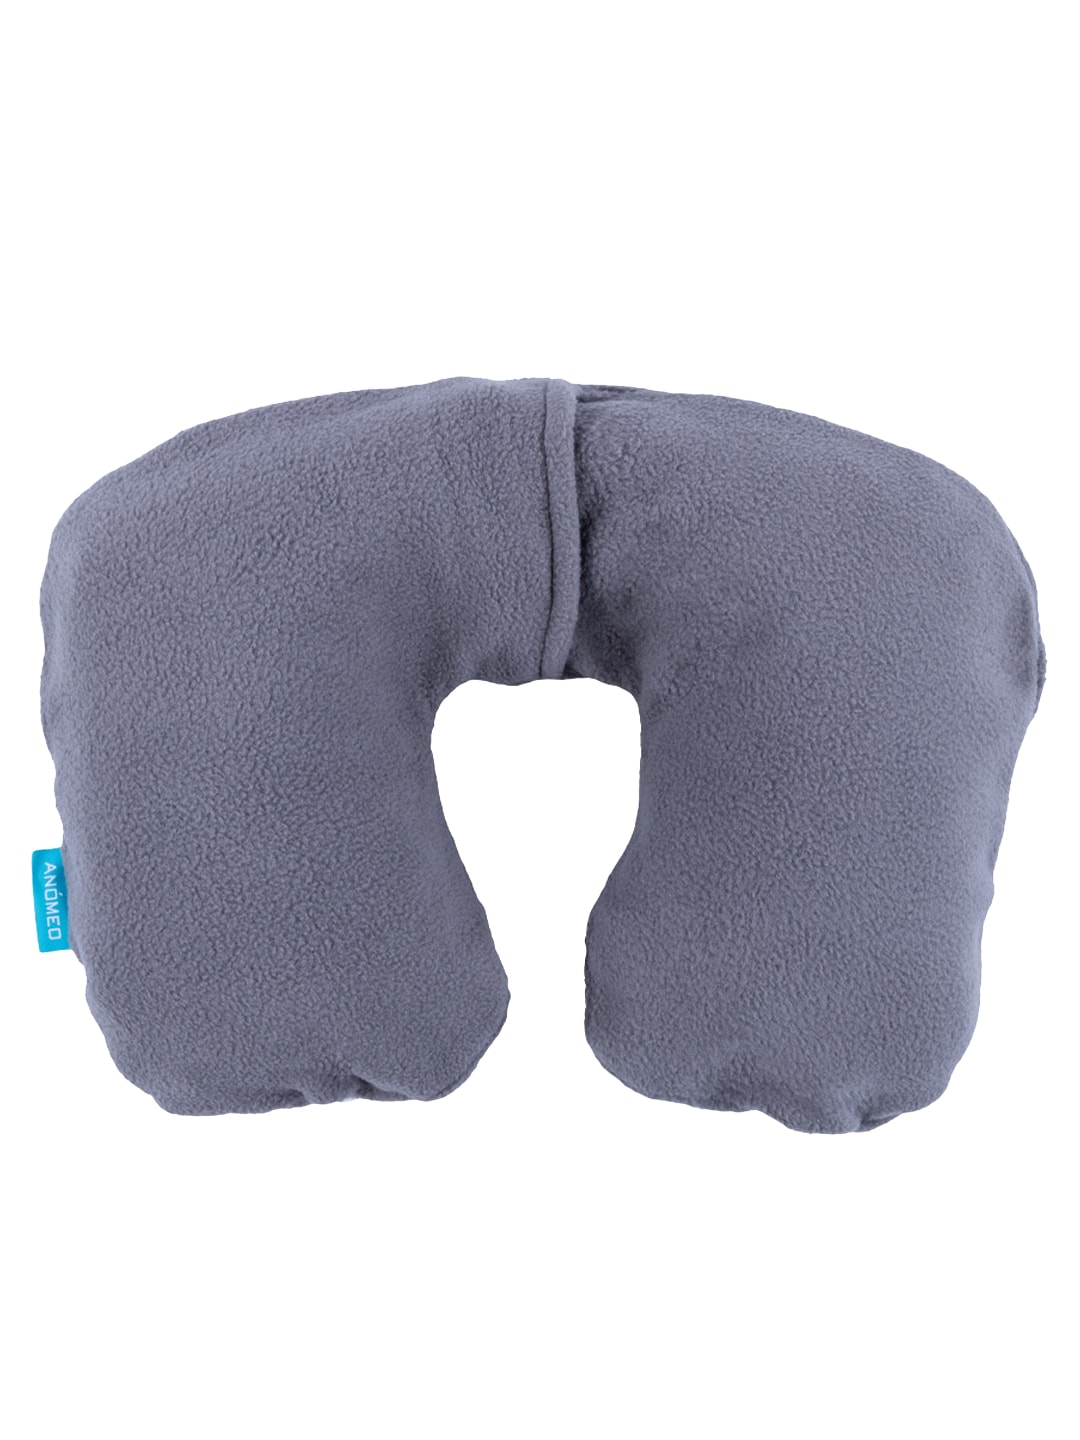 ANOMEO Grey Solid Neck Pillows Price in India